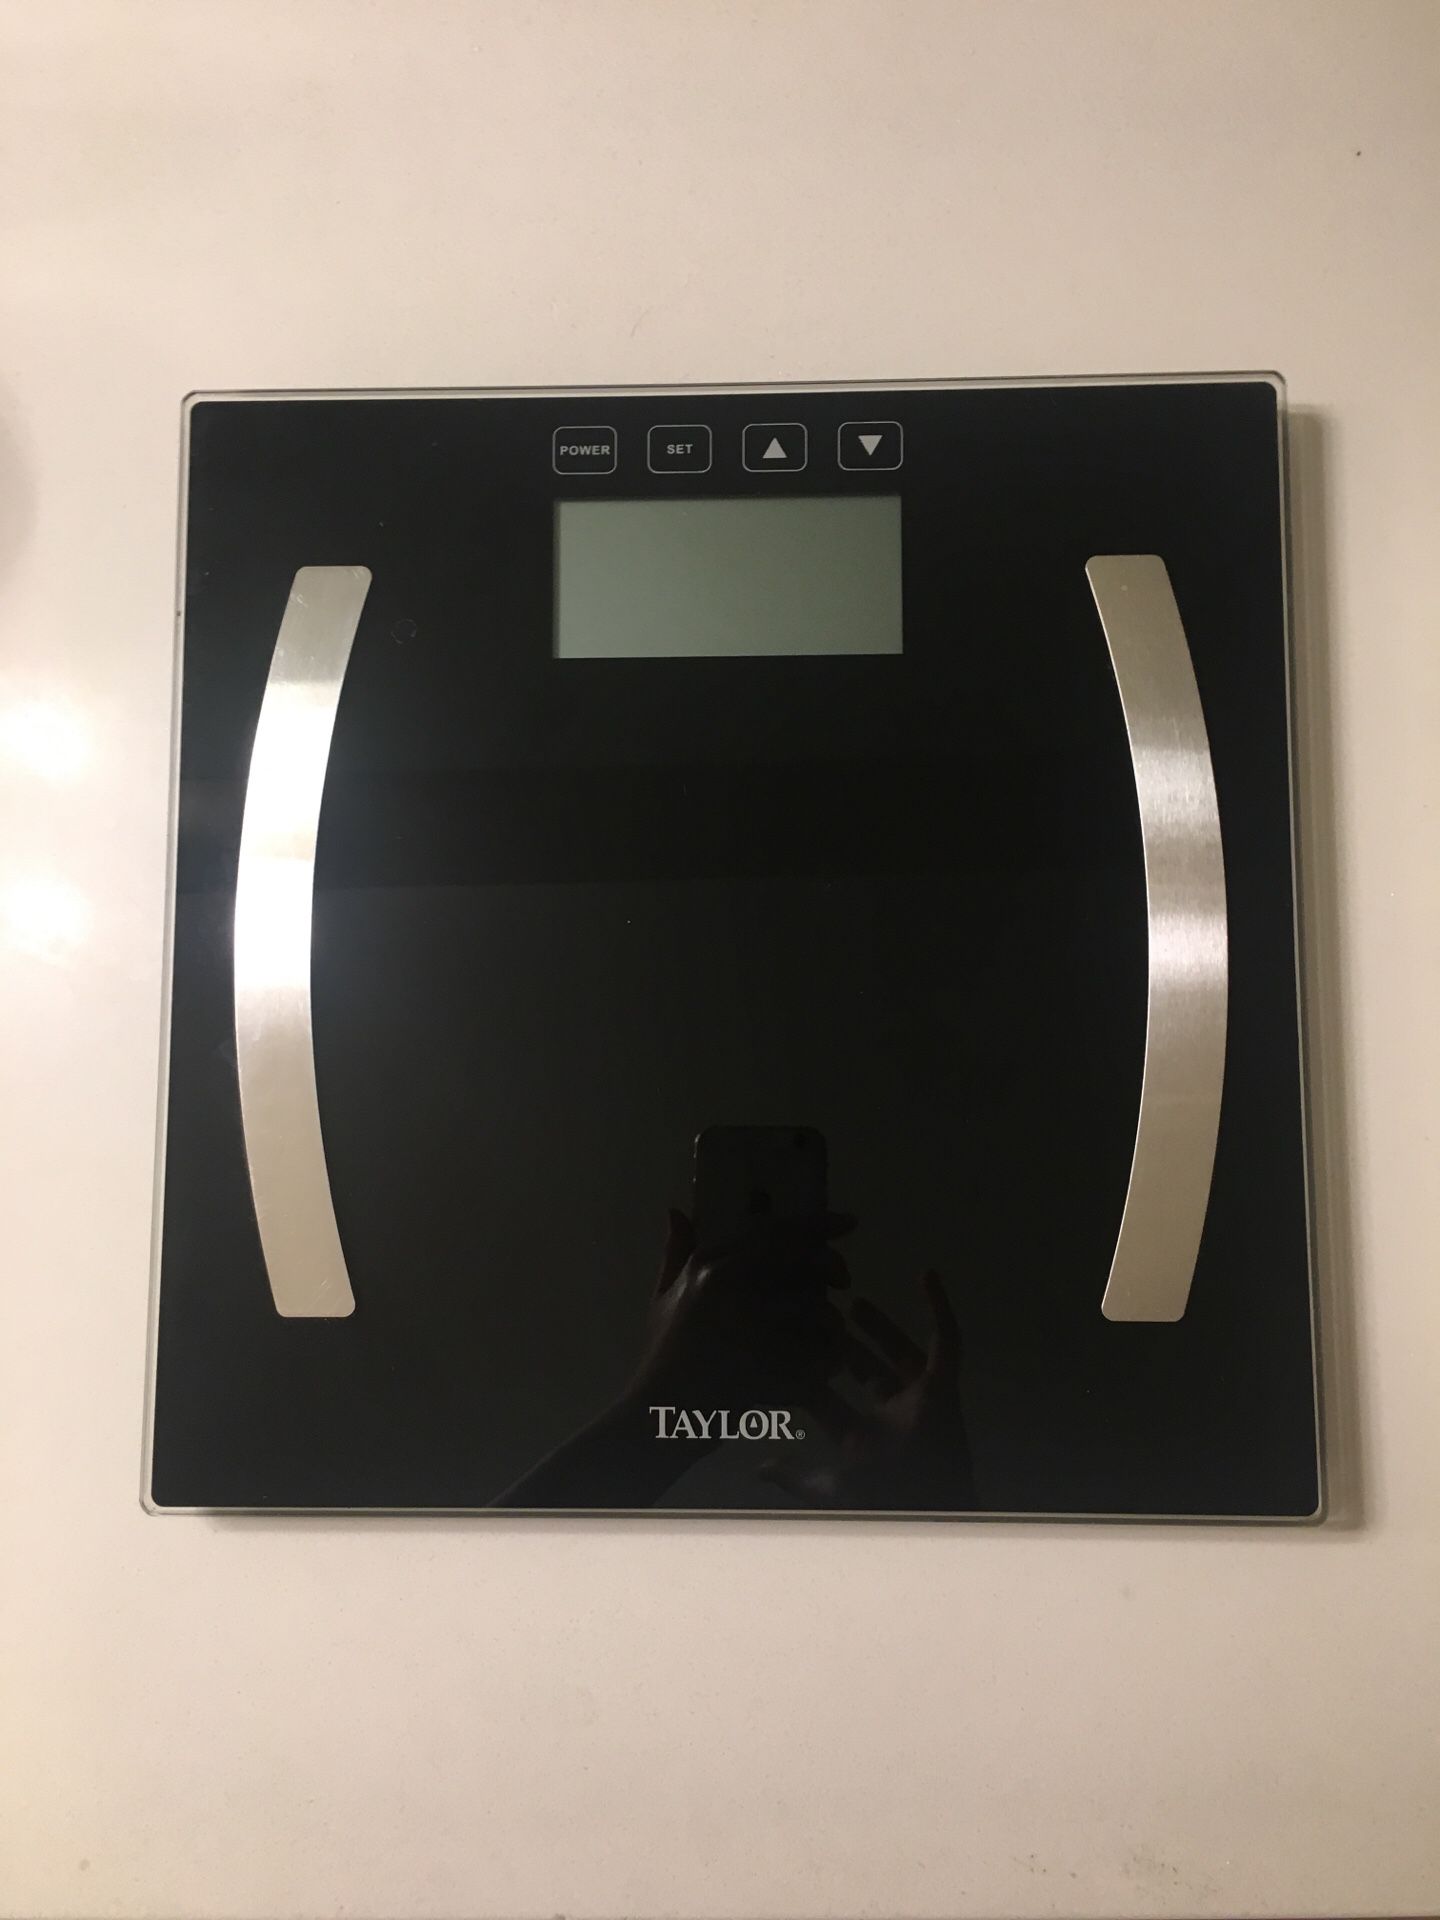 Taylor Tempered Glass Body Composition Bathroom Scale Clear Instant Read